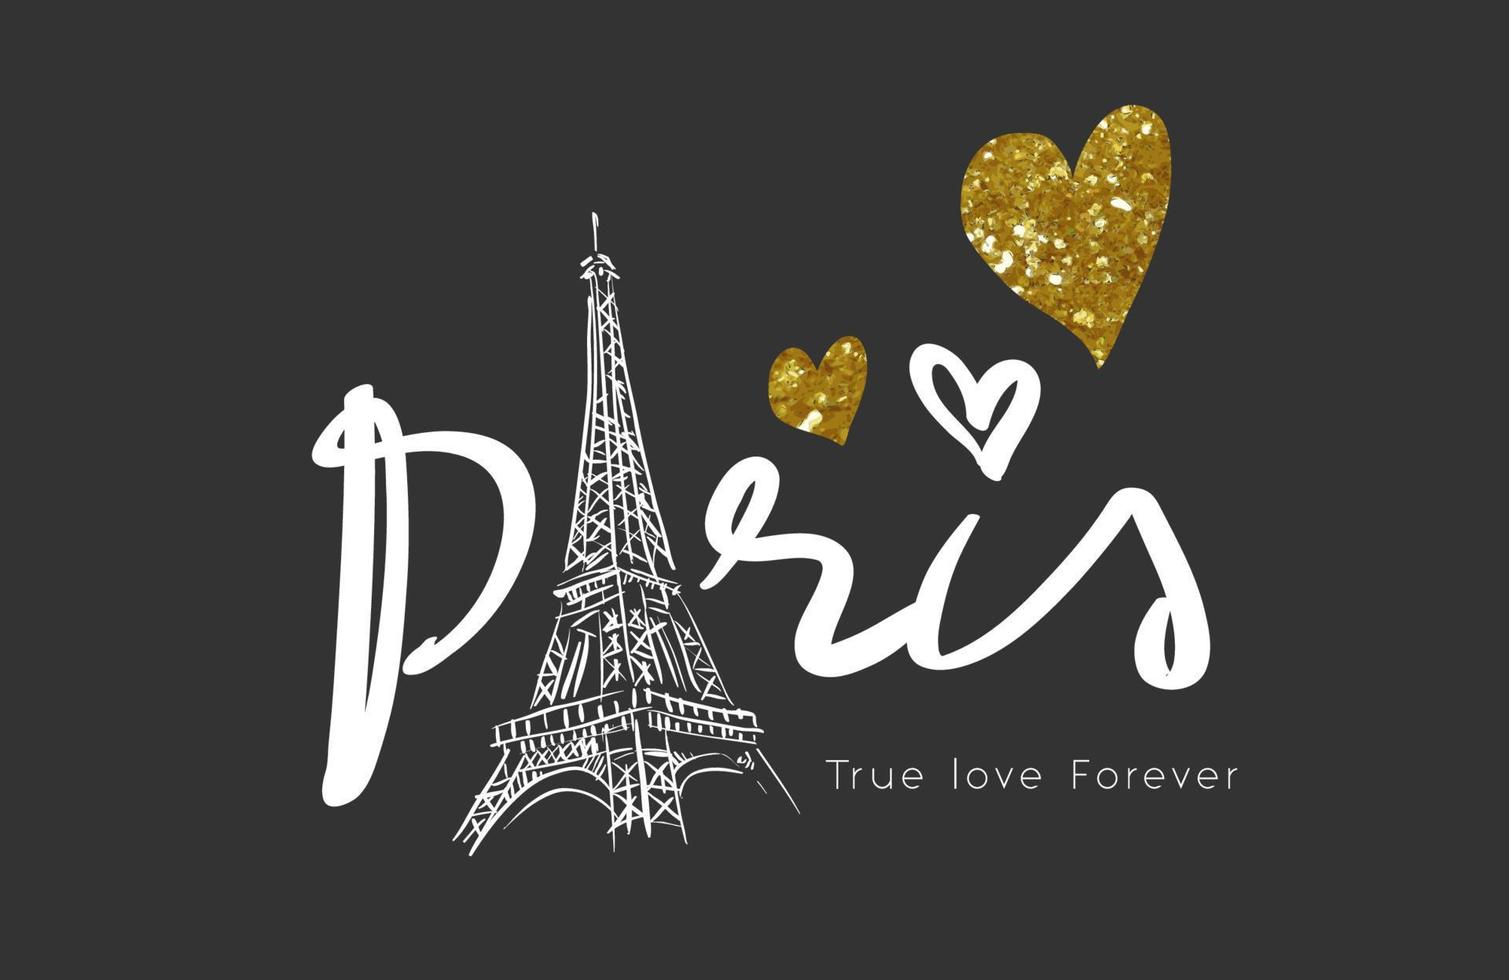 Paris true love forever slogan with Eiffel tower illustration and glitter heart on black background vector